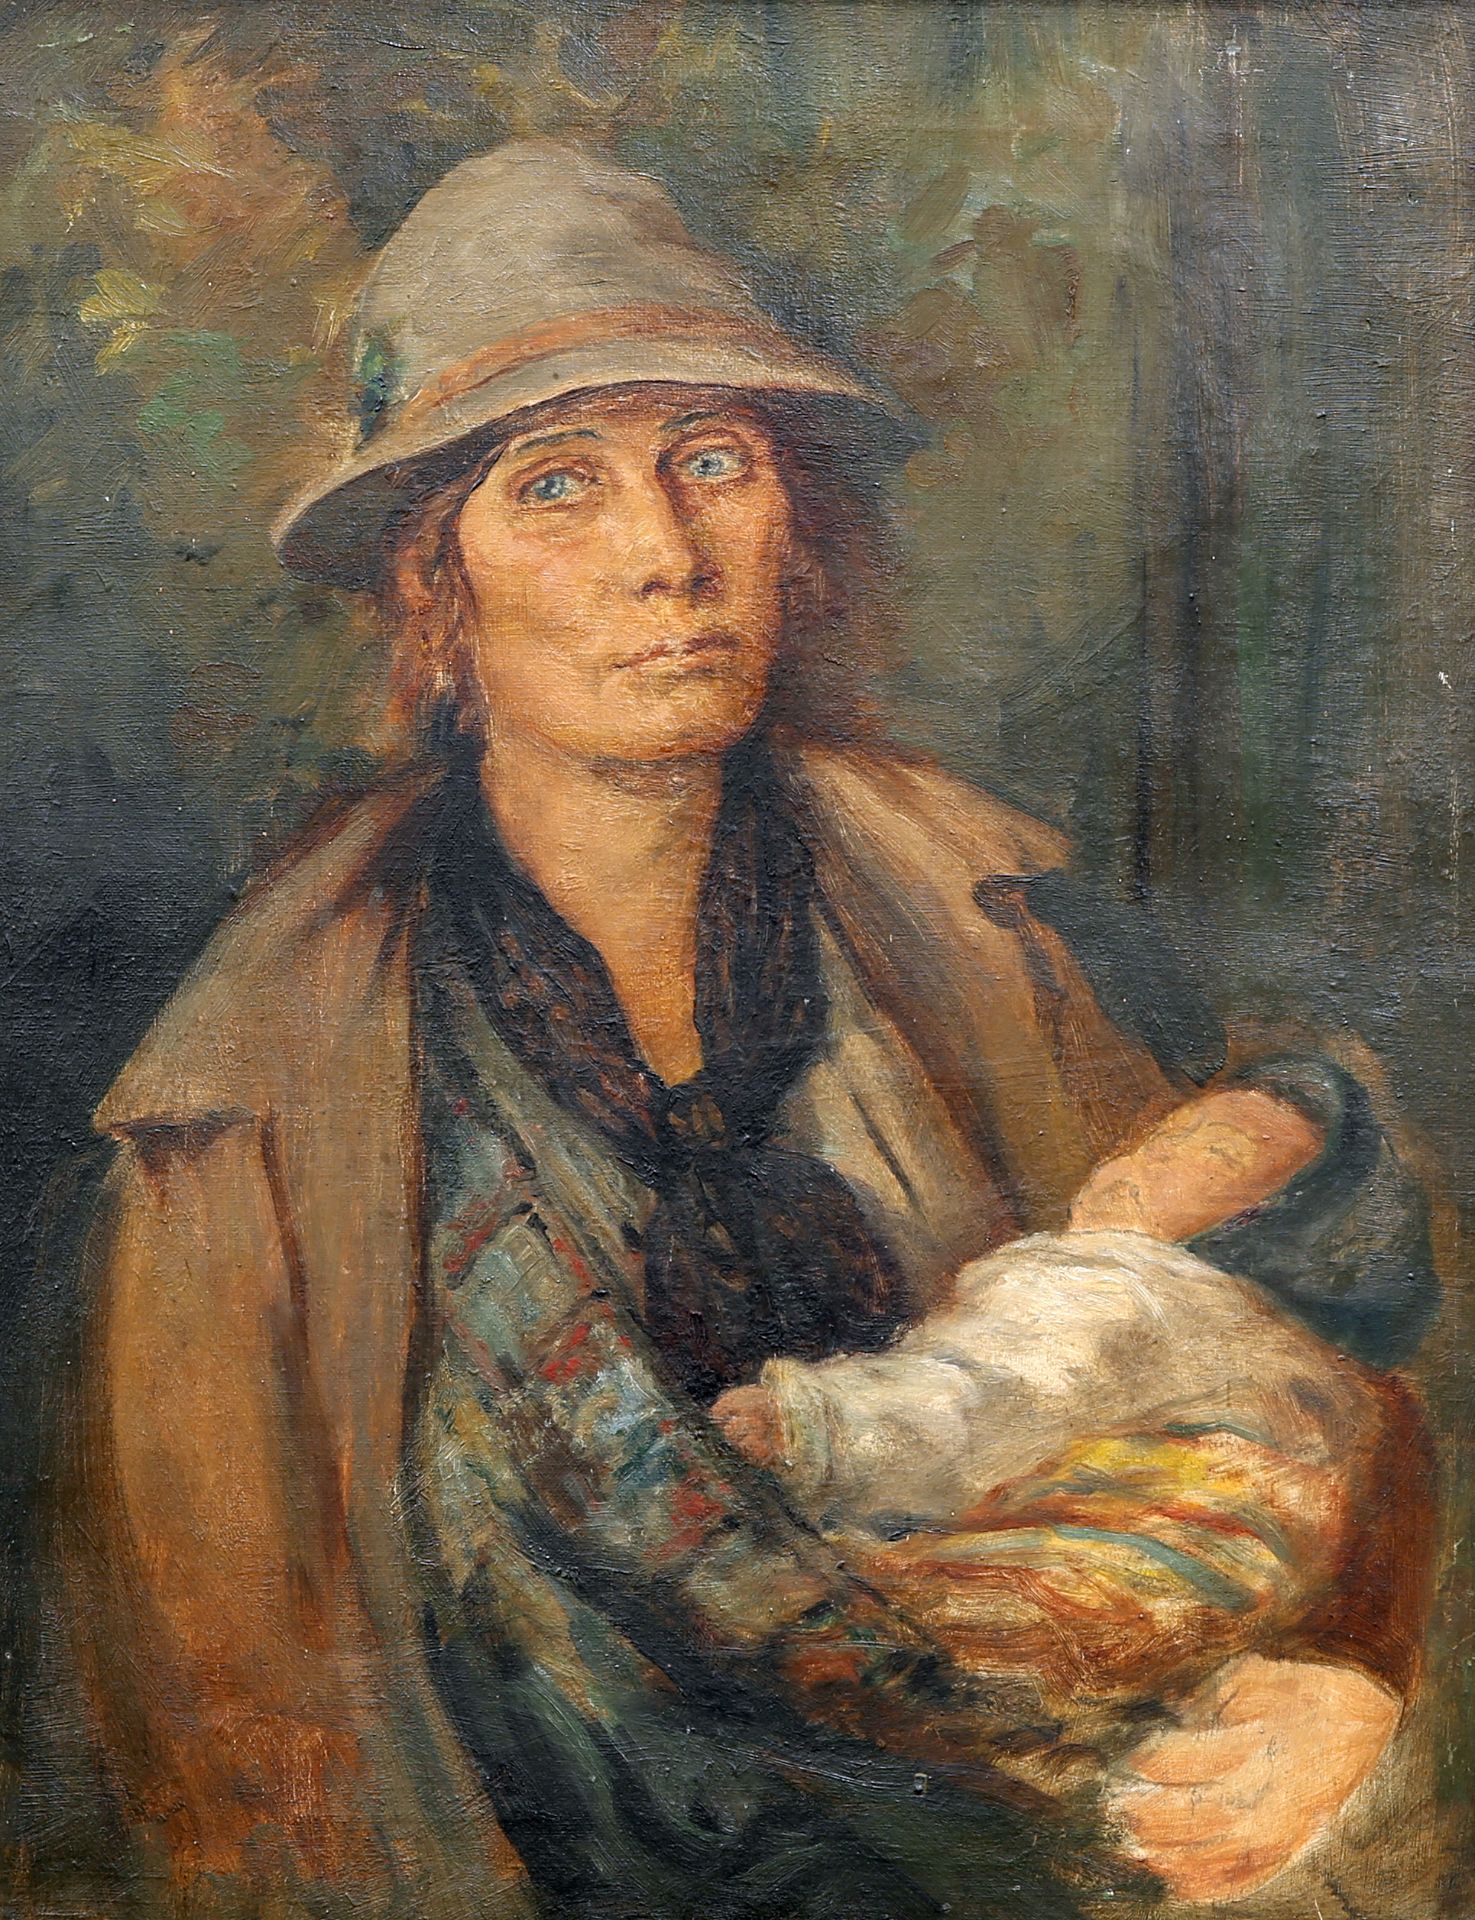 19TH CENTURY SCHOOL, MOTHER WITH BABY IN ARMS